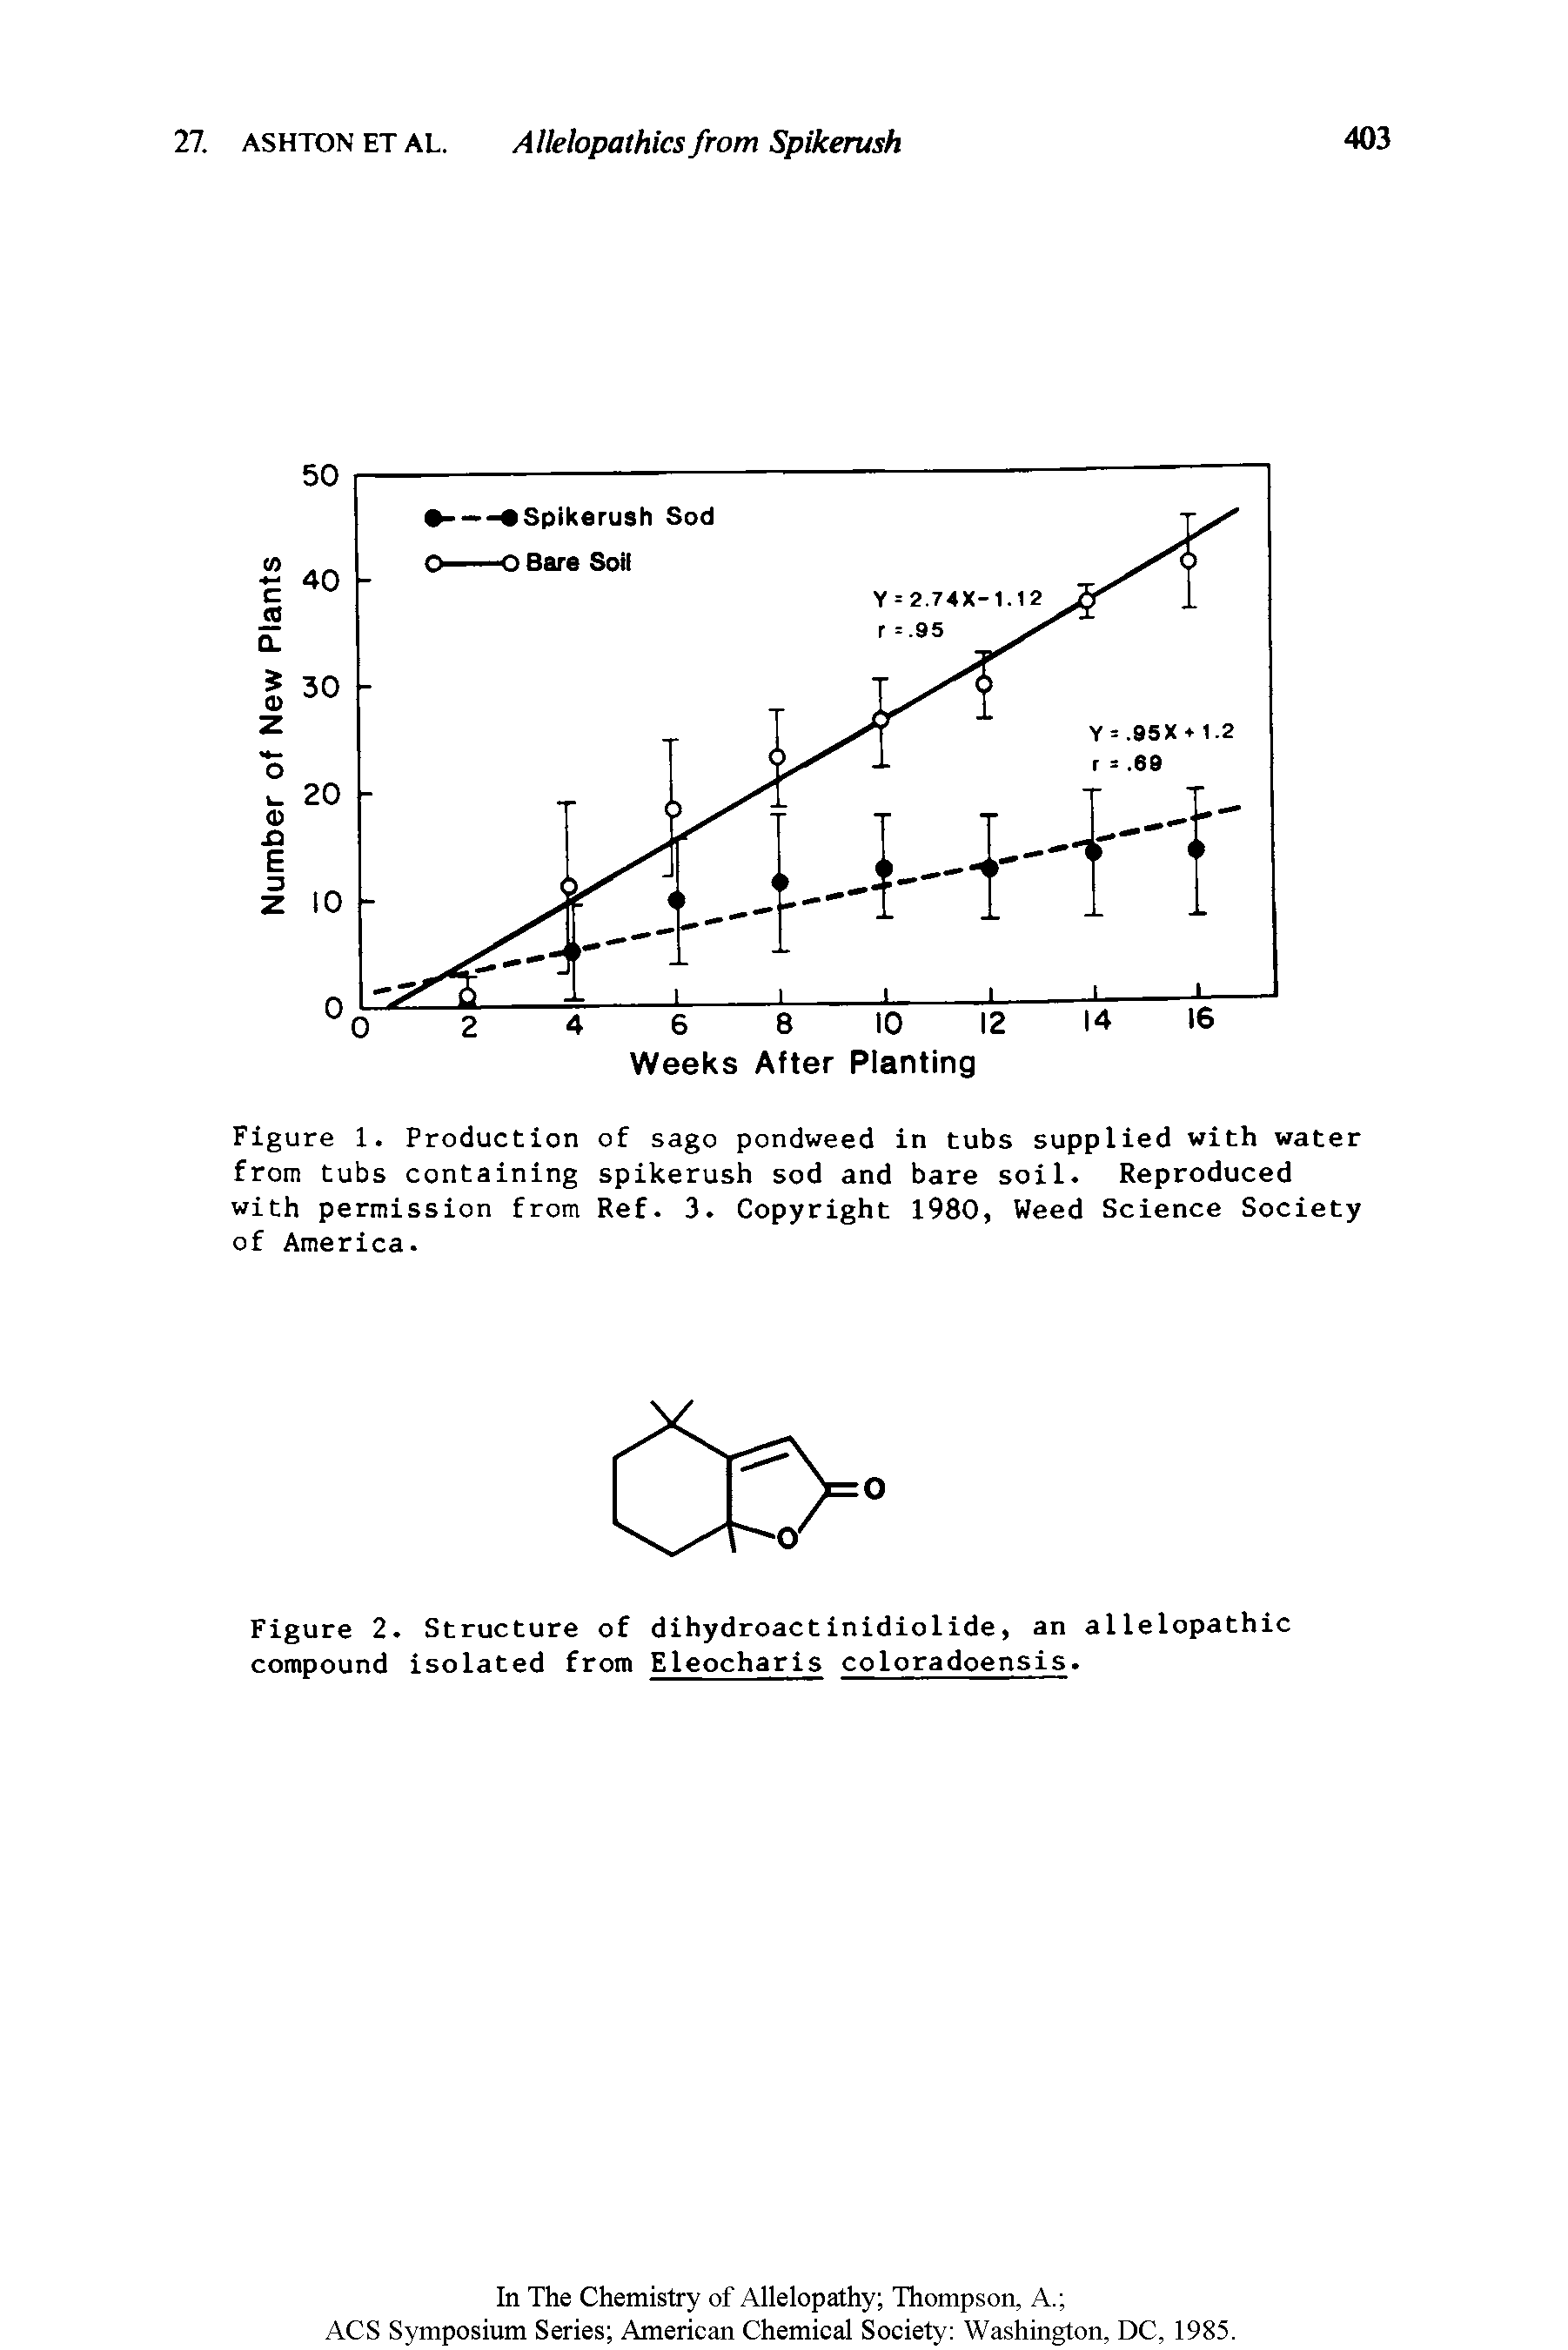 Figure 1. Production of sago pondweed in tubs supplied with water from tubs containing spikerush sod and bare soil. Reproduced with permission from Ref. 3. Copyright 1980, Weed Science Society of America.